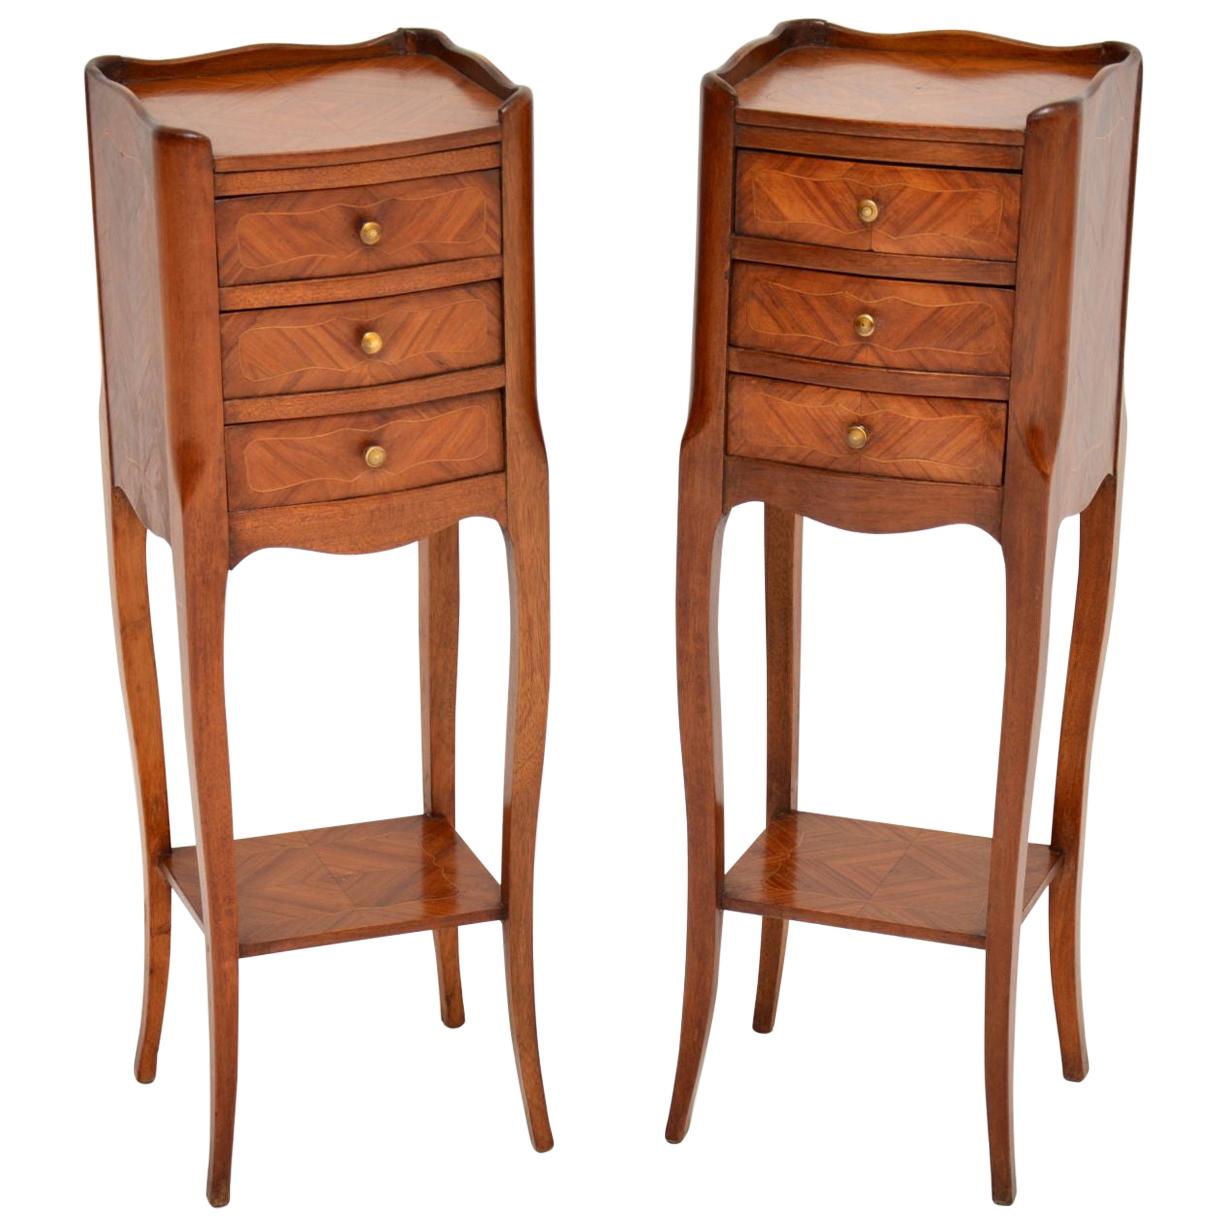 Pair of Antique French Inlaid King Wood Bedside Tables